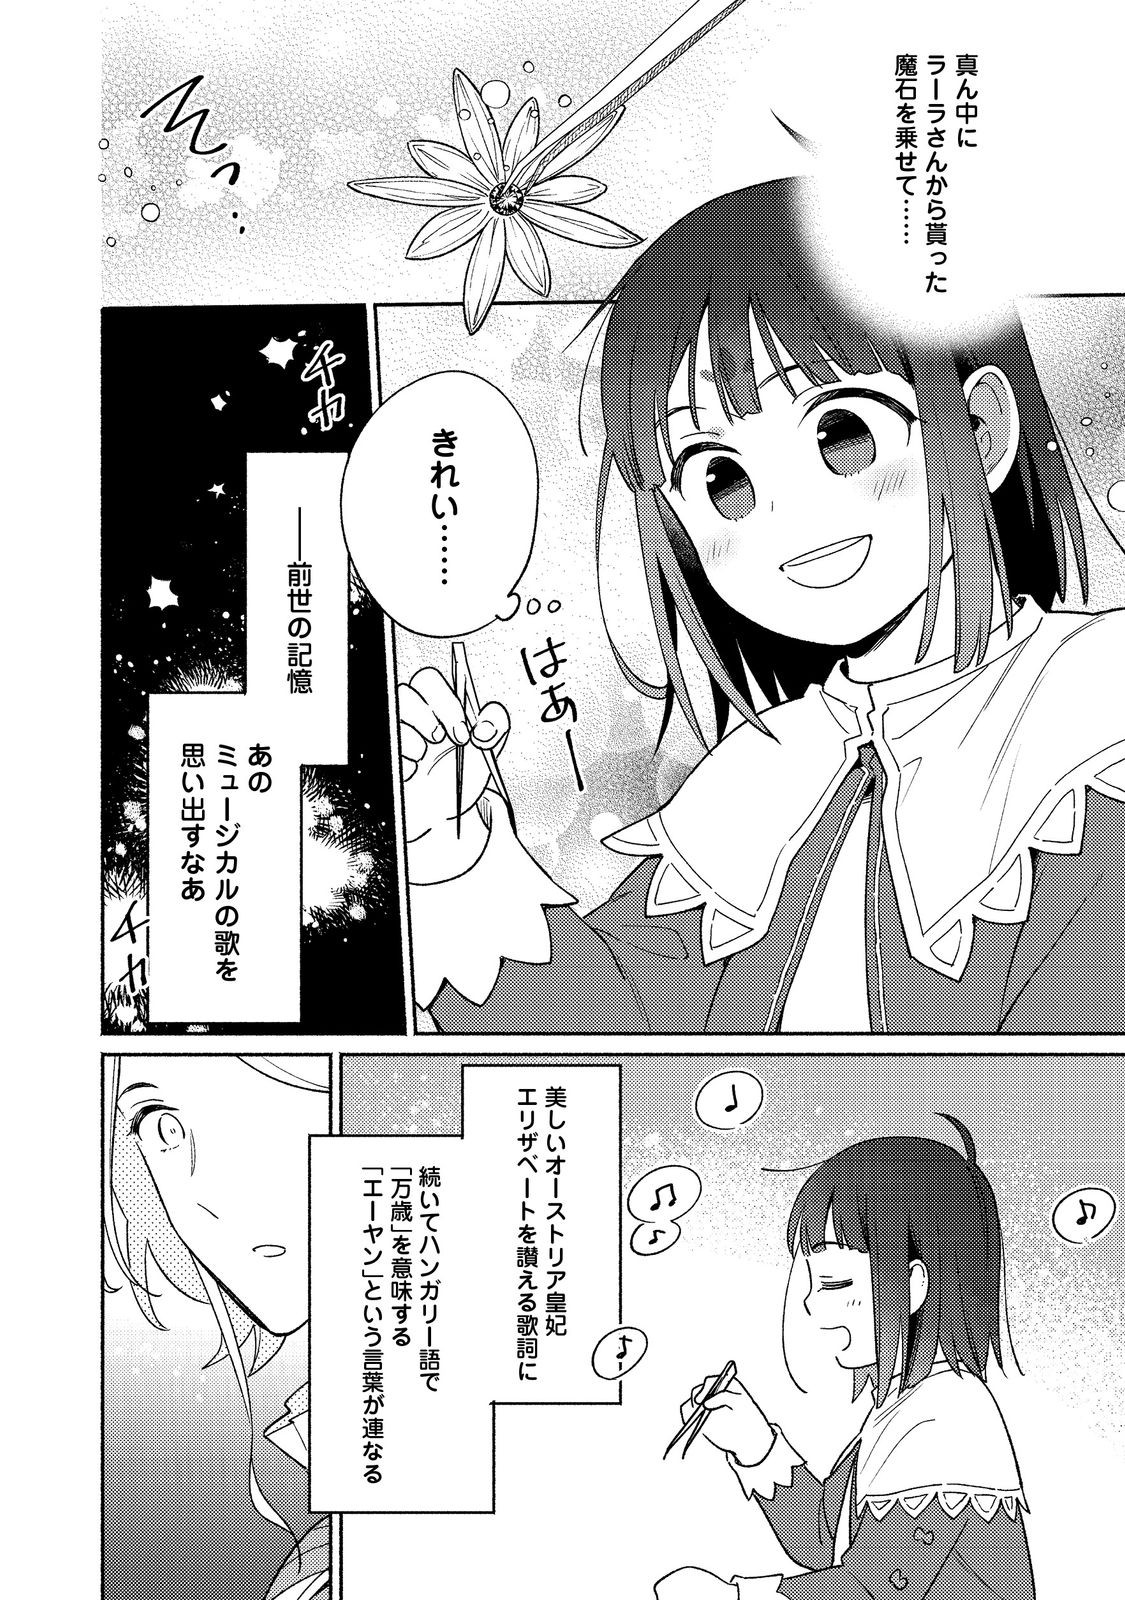 I’m the White Pig Nobleman 第21.1話 - Page 16